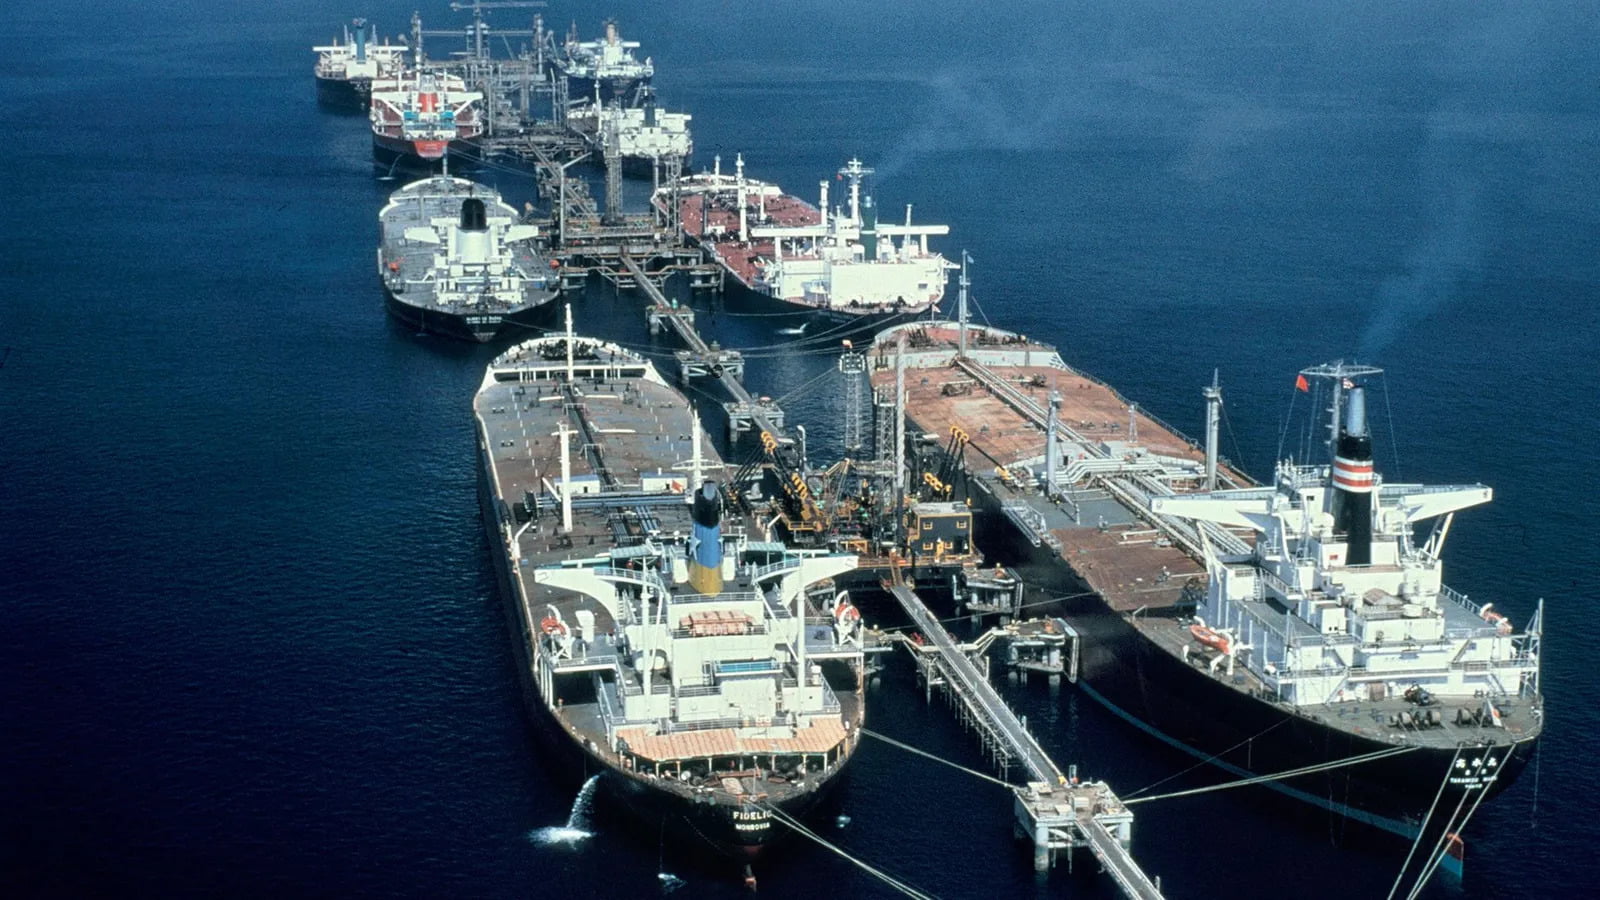 How to rehabilitate old oil supertankers